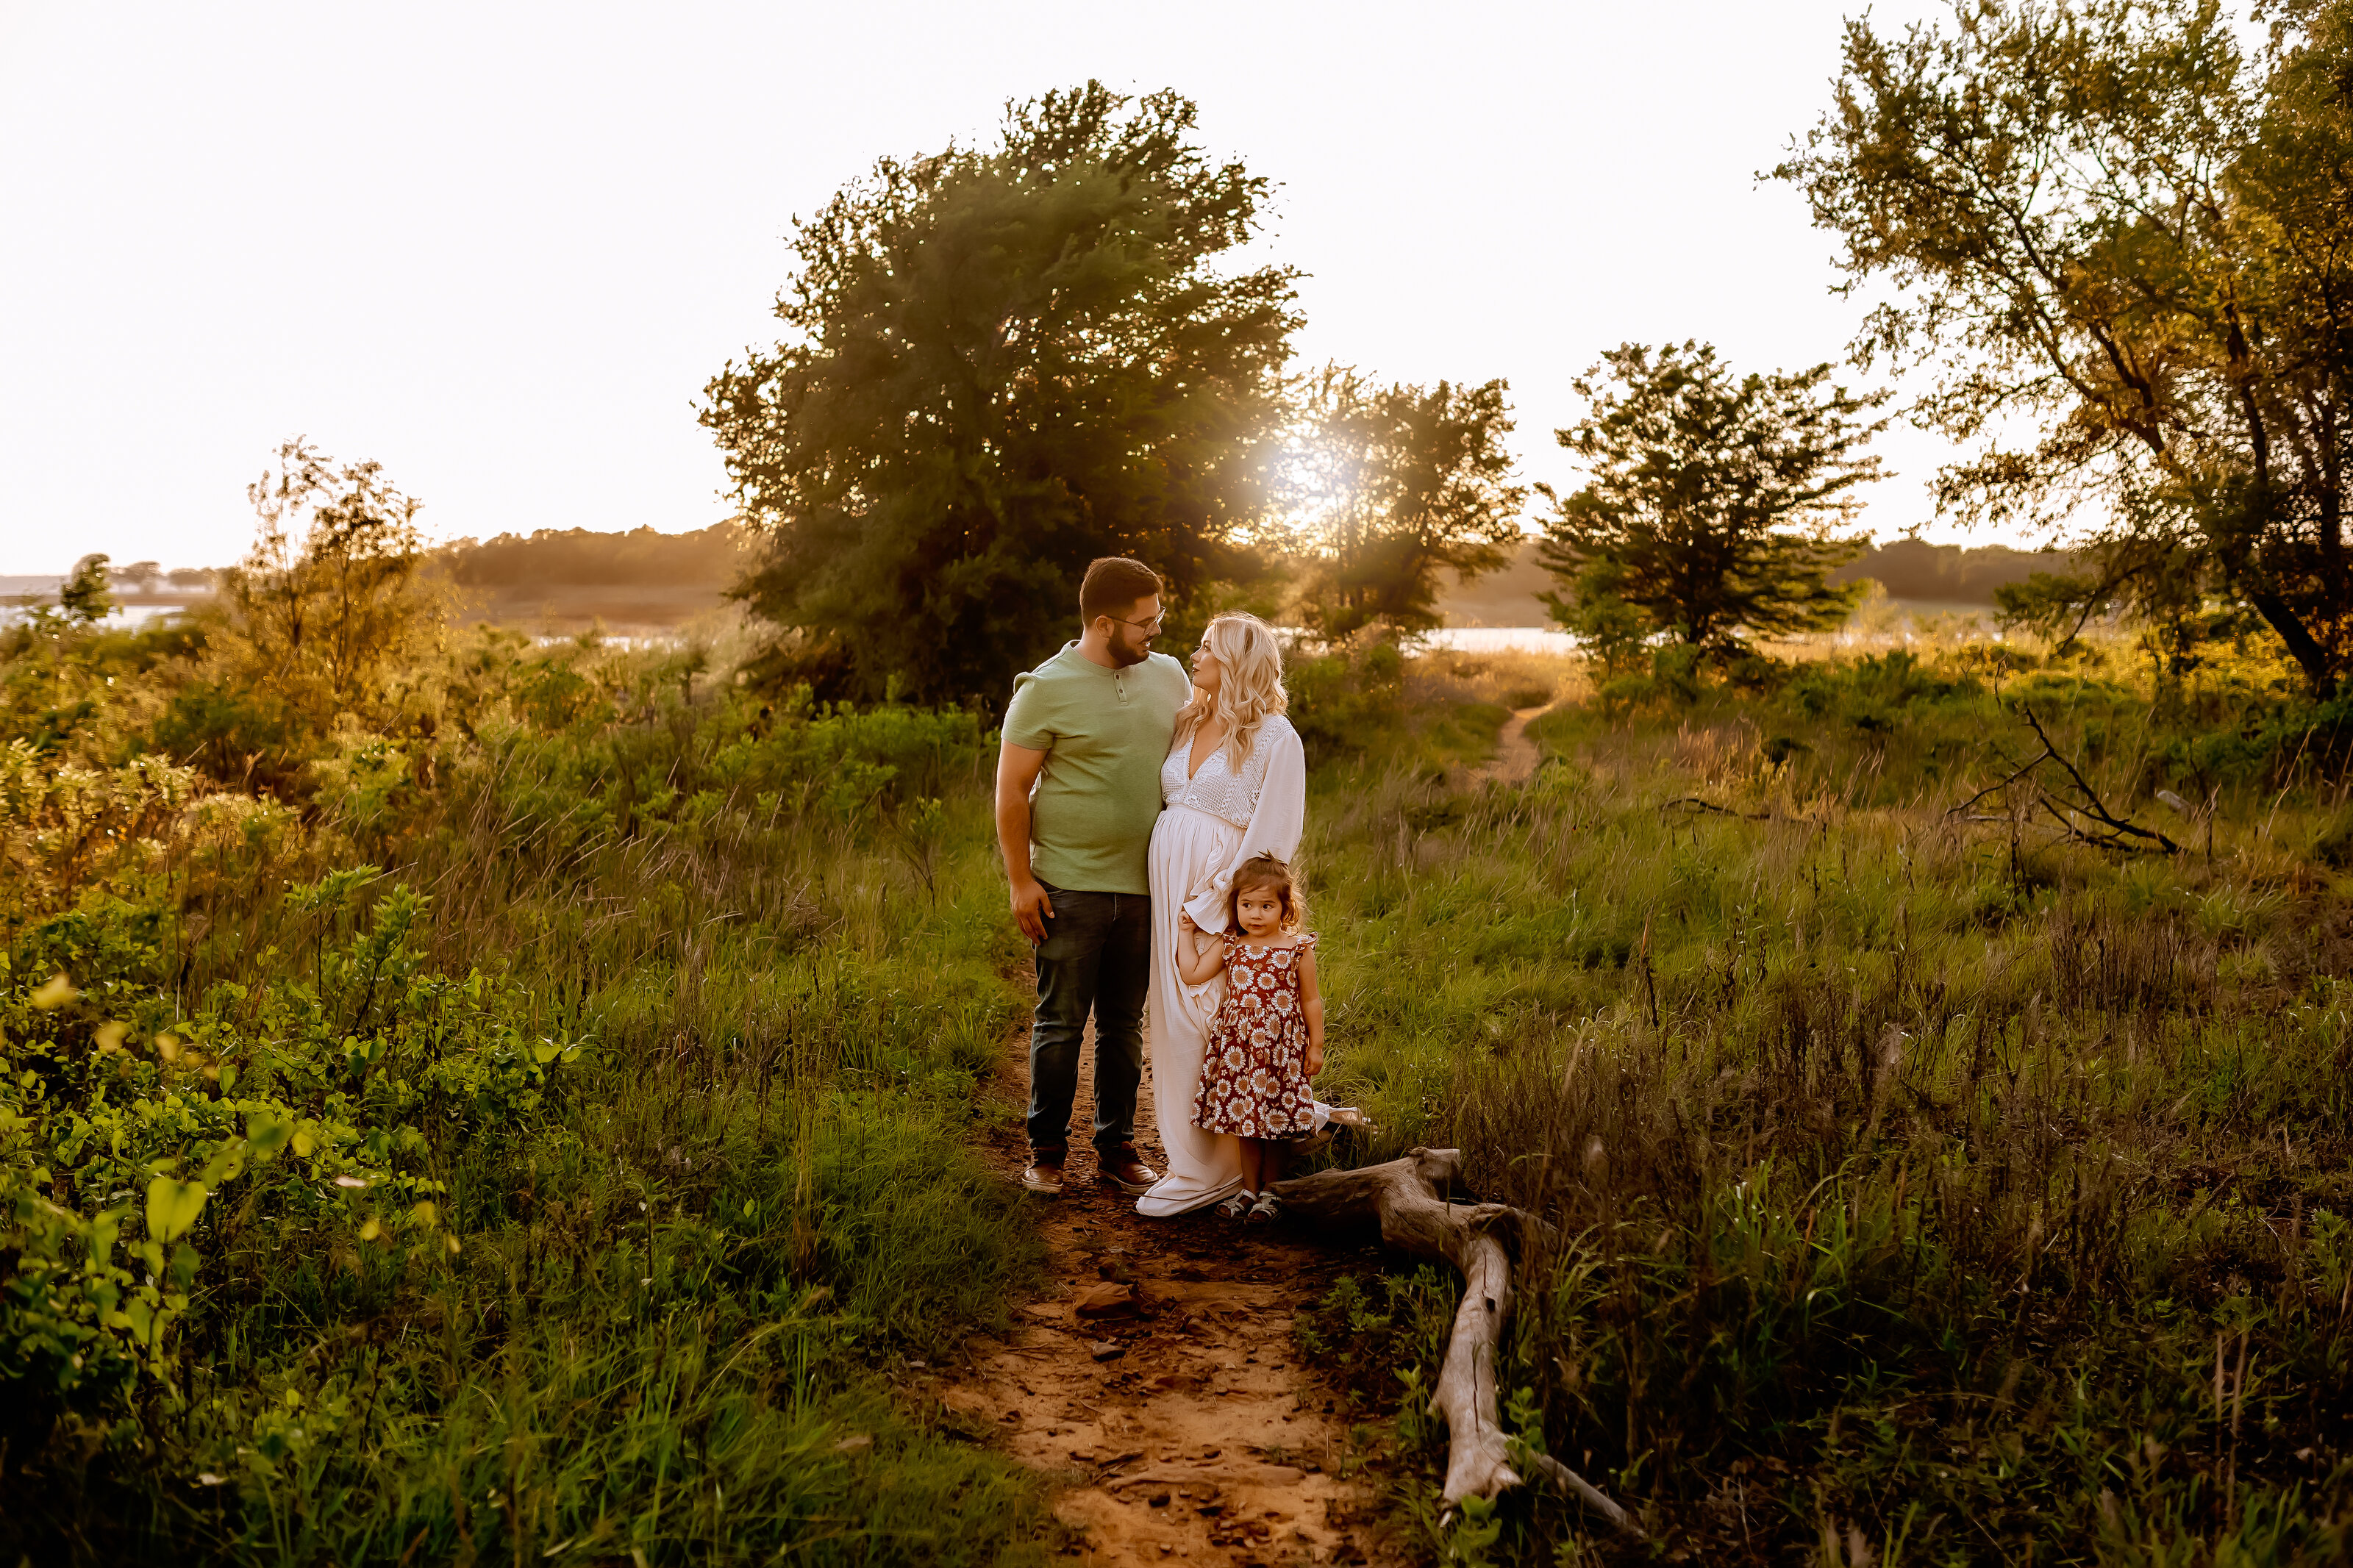 Maternity Session in Flower Mound, Texas | Burleson, Texas Family and Newborn Photographer